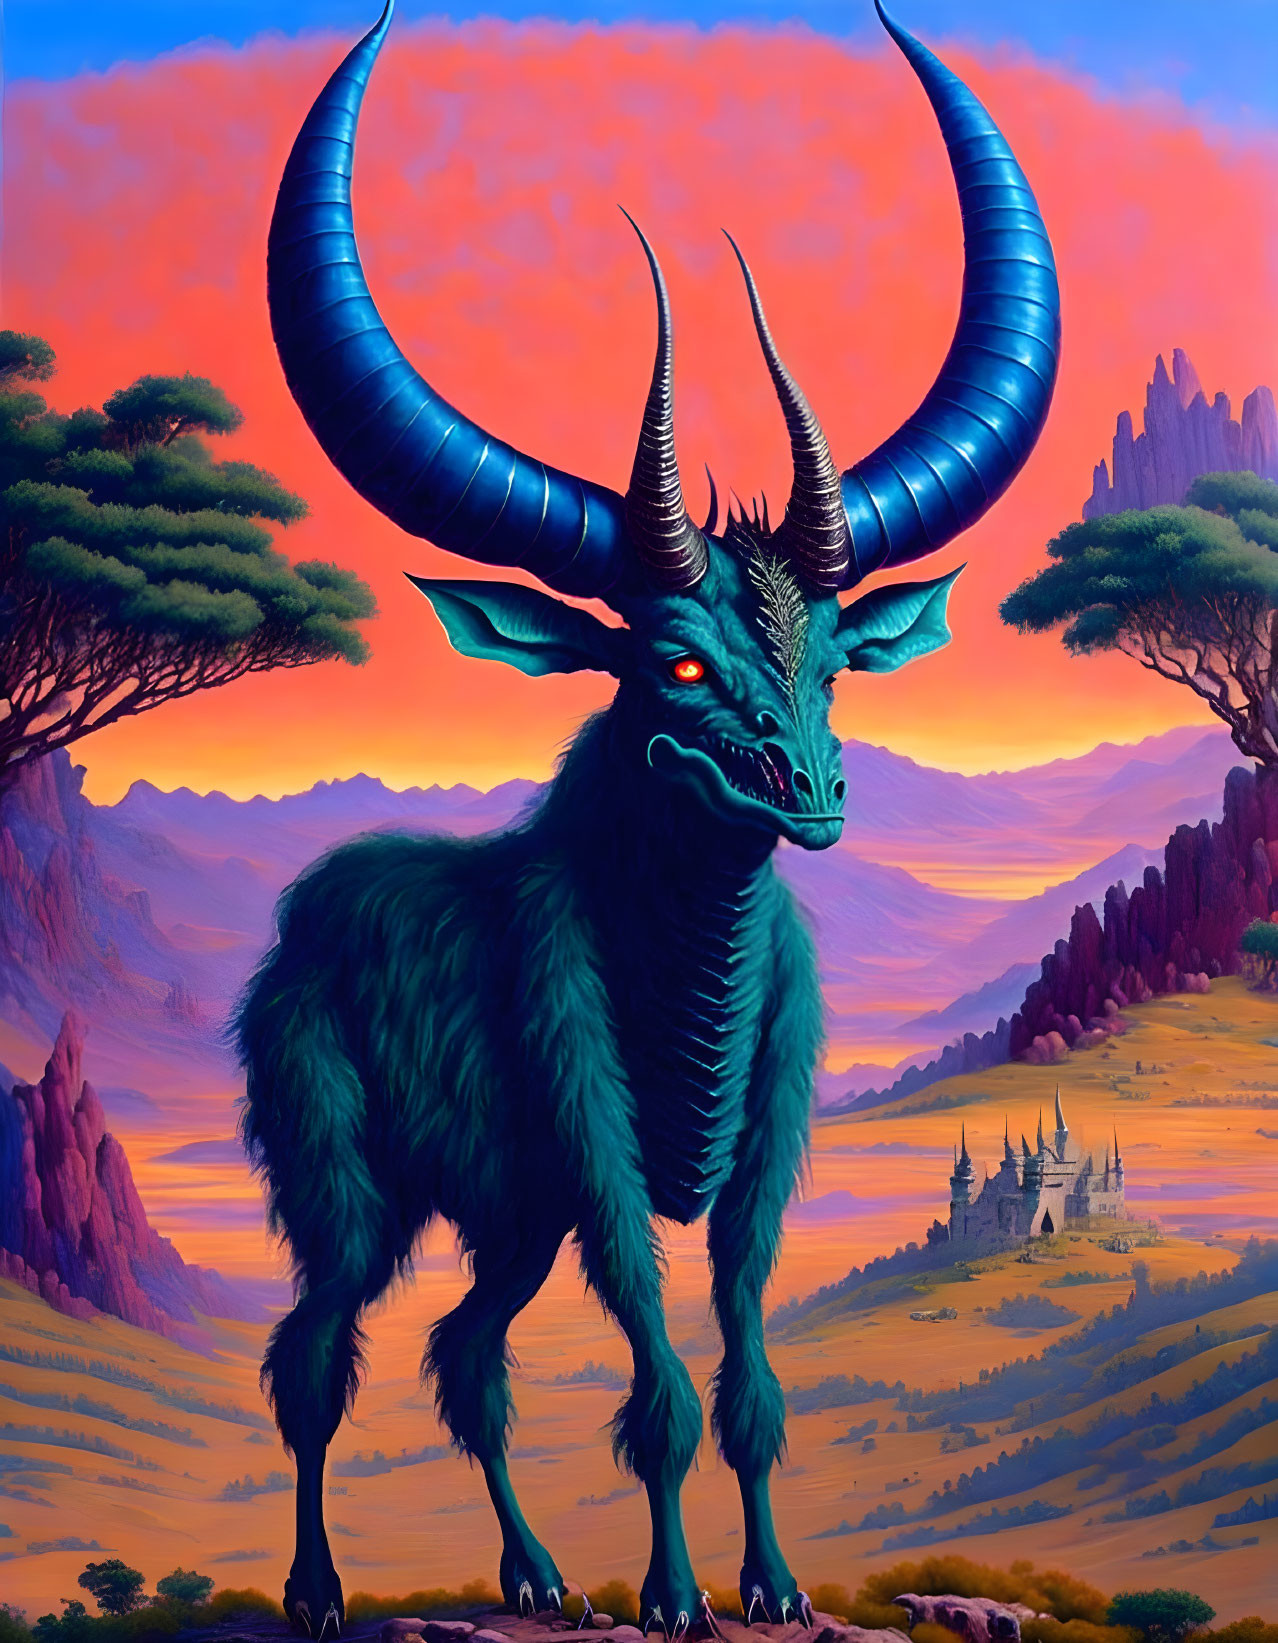 Majestic mythical creature with long horns in fantasy landscape